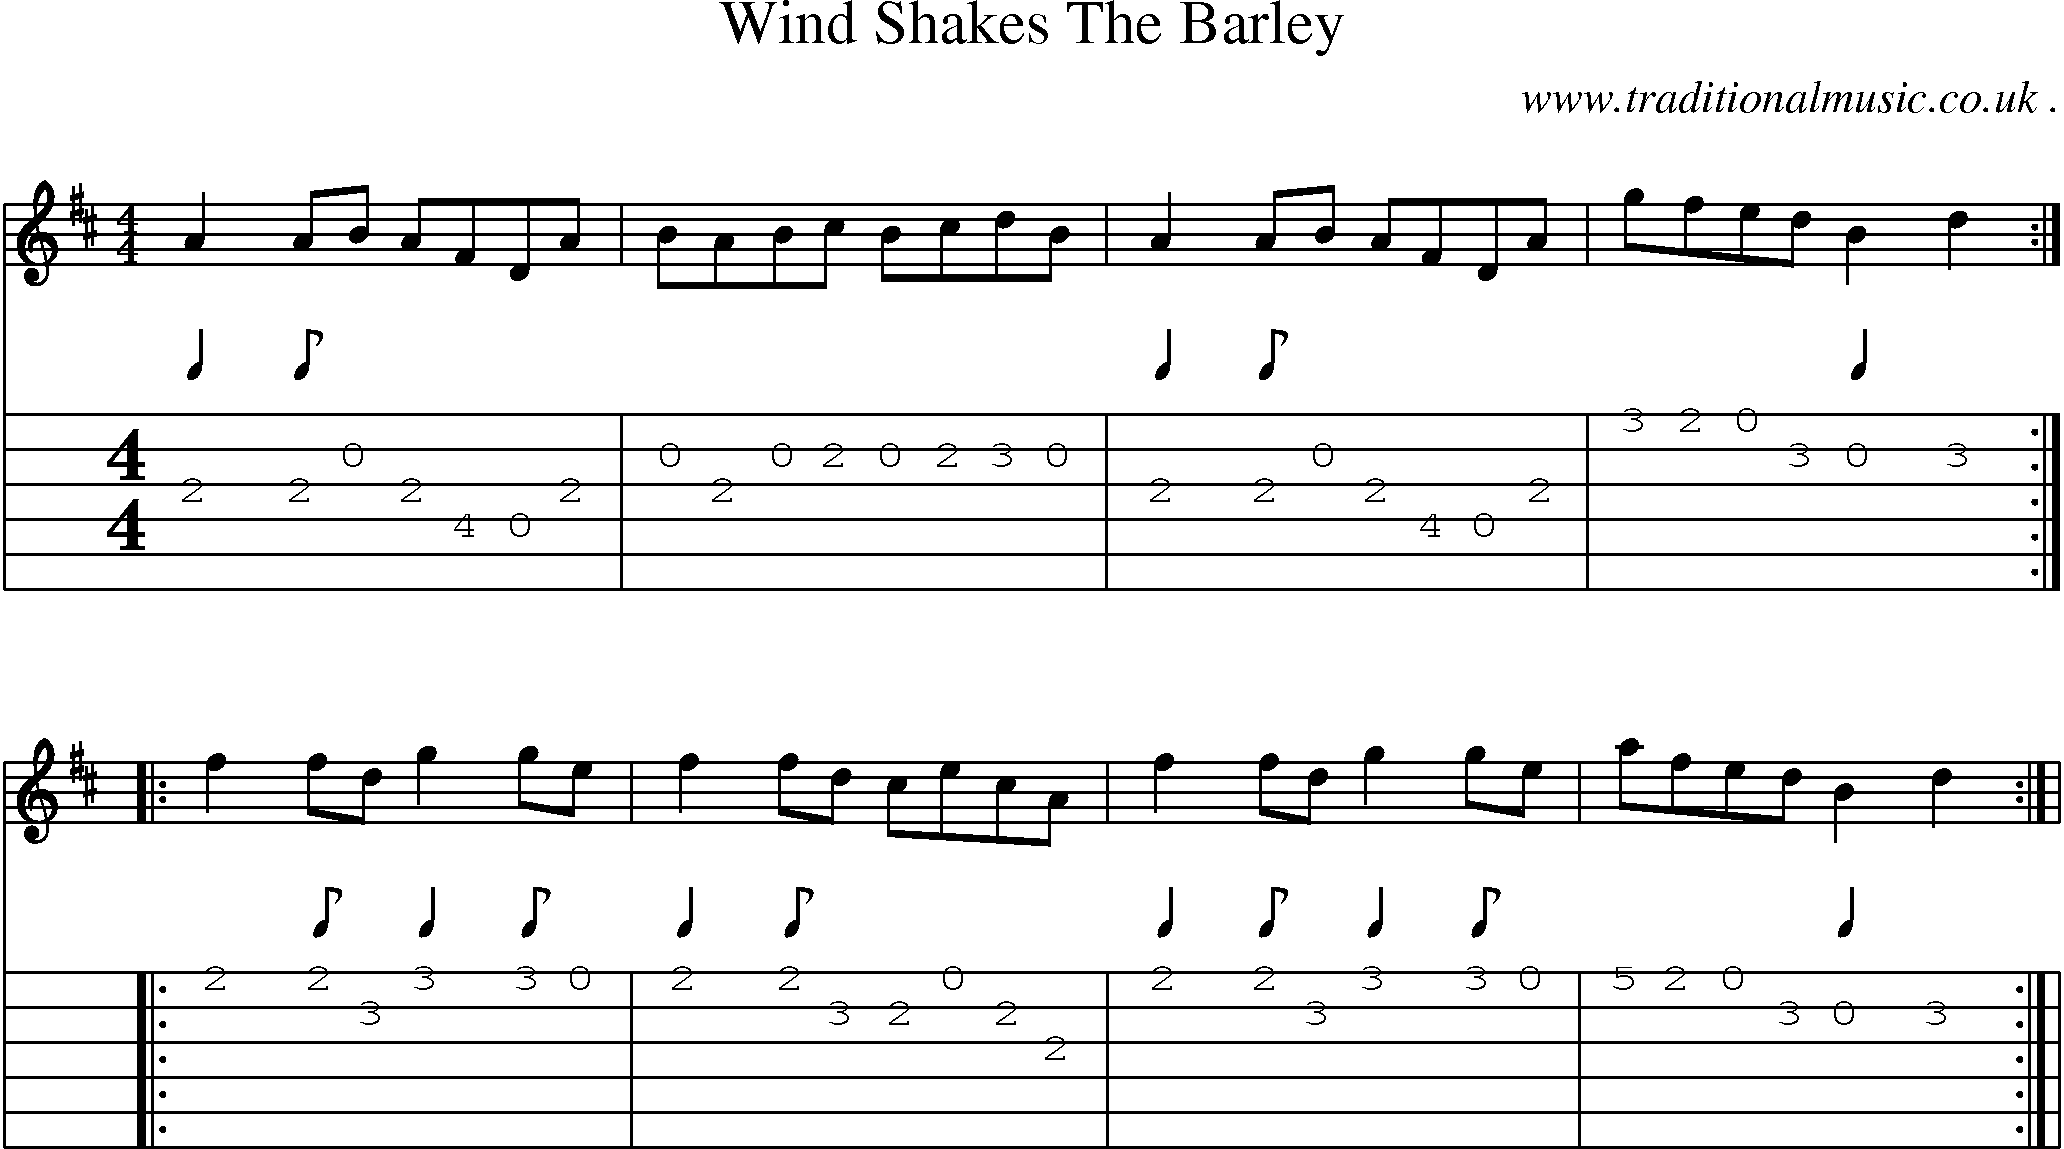 Sheet-Music and Guitar Tabs for Wind Shakes The Barley